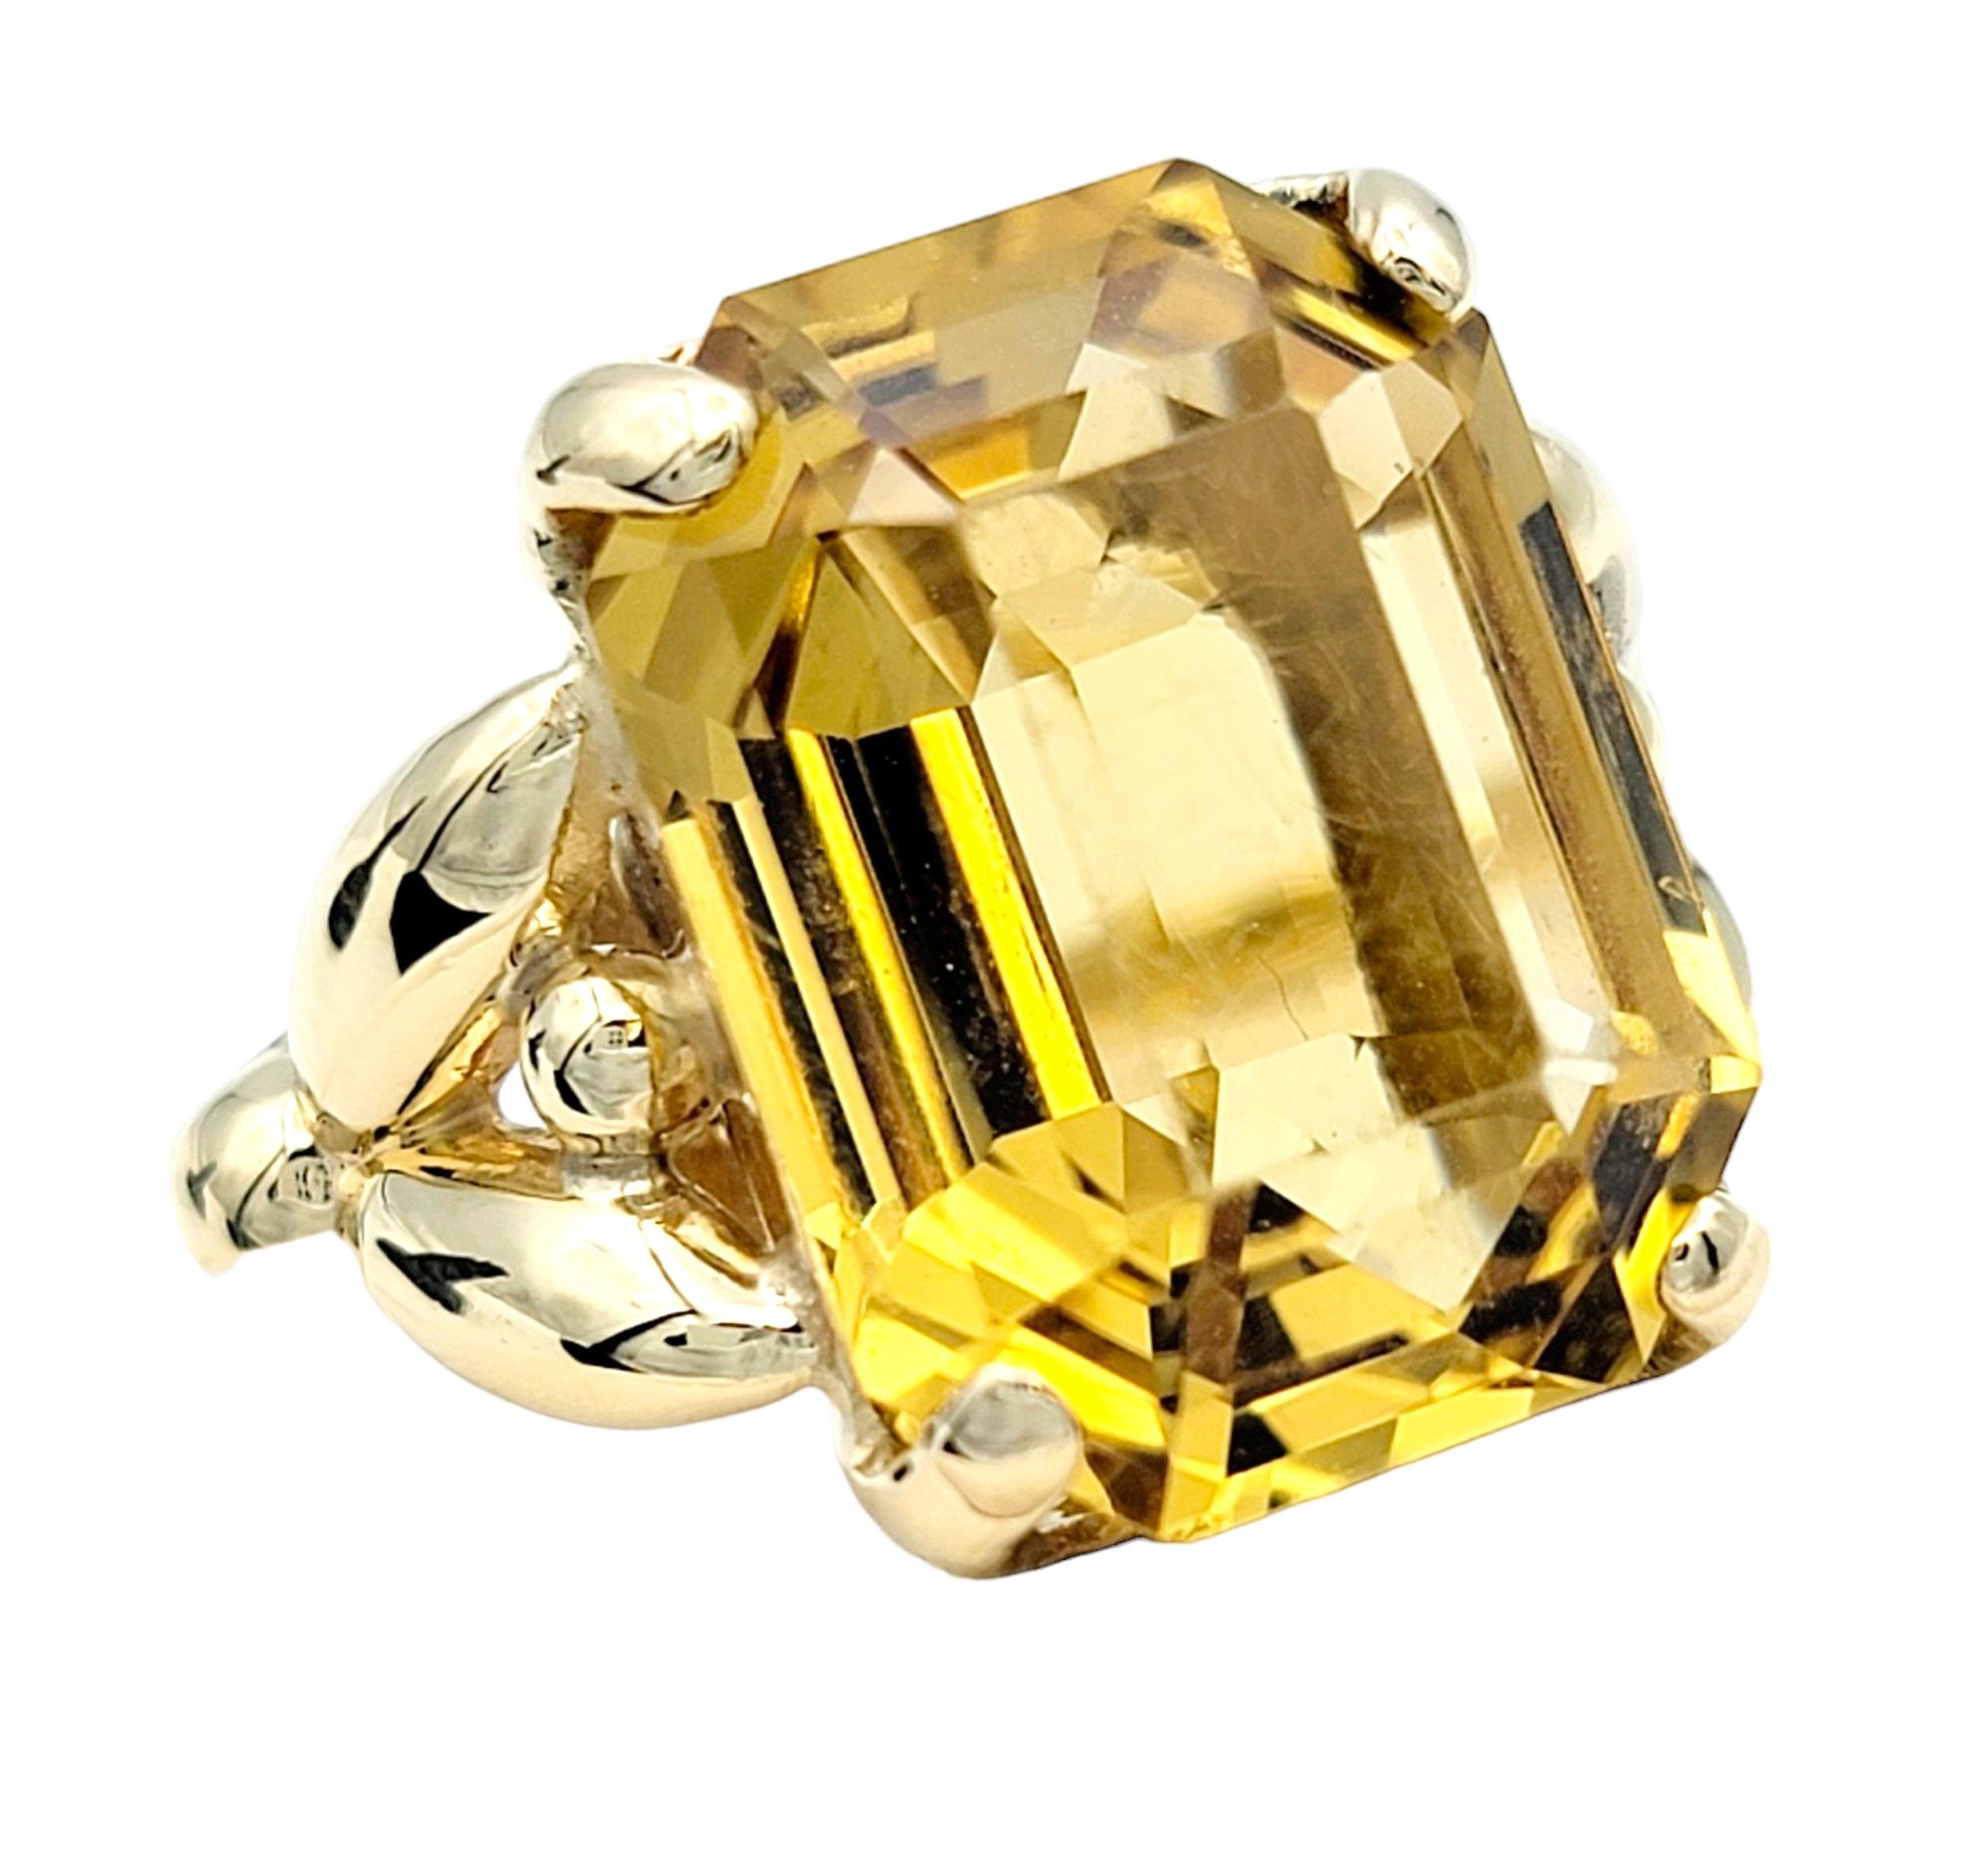 Ring Size: 8.75

This gorgeous Tiffany & Co. citrine cocktail ring, set in 14 karat yellow gold, is a show-stopping piece, combining luxury and elegance in a design that is both bold and sophisticated. The centerpiece of the ring is a remarkable